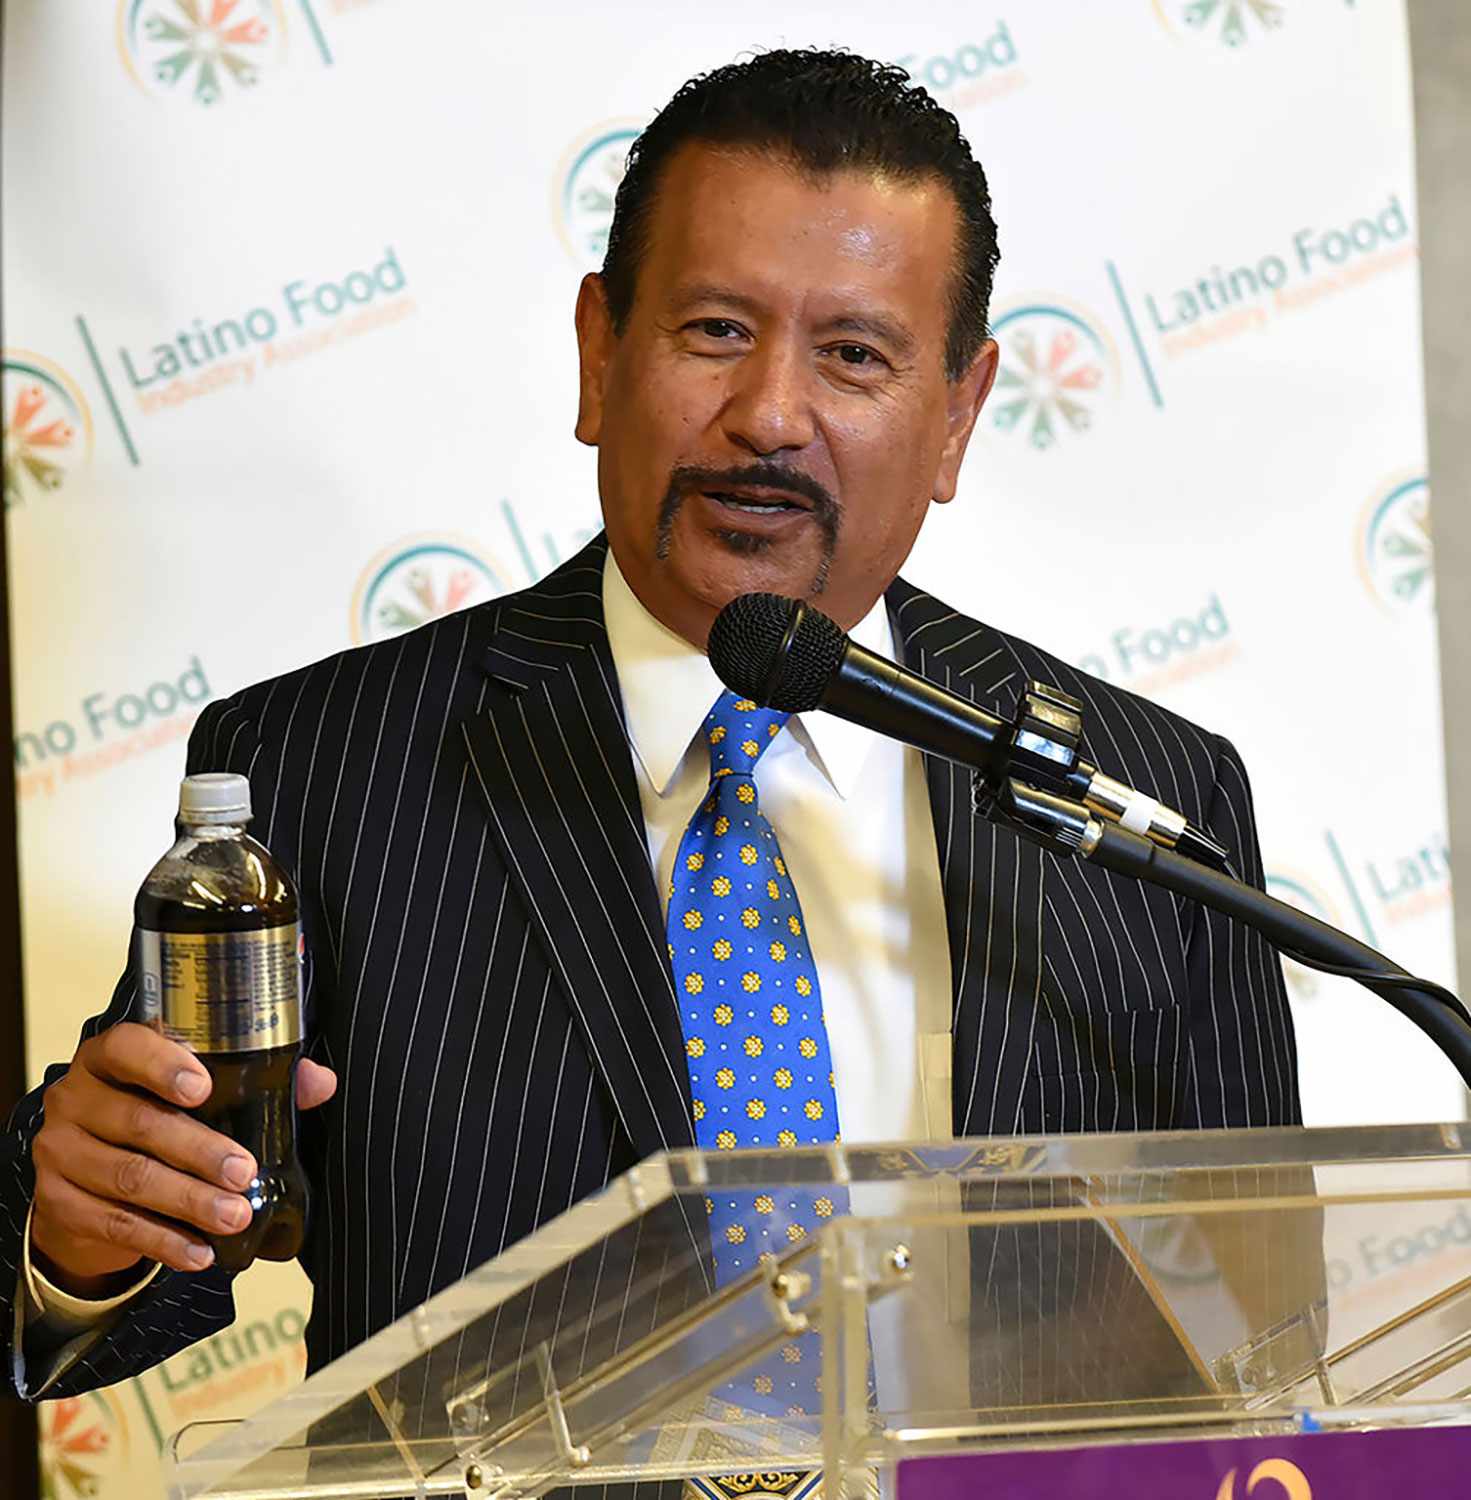 LOS ANGELES, CALIFORNIA - AUGUST 10 : Richard Montanez, PepsiCo, Head of Marketing and Sales, North America and creator of 'Flaming Hot Cheetos' announces corporate support to the Latino Food Industry Association (LFIA) during press conference announcement of the Latino Food Industry Association (LFIA), August 10, 2017 in Los Angeles, California. (Photo by Getty Images/Bob Riha, Jr.)